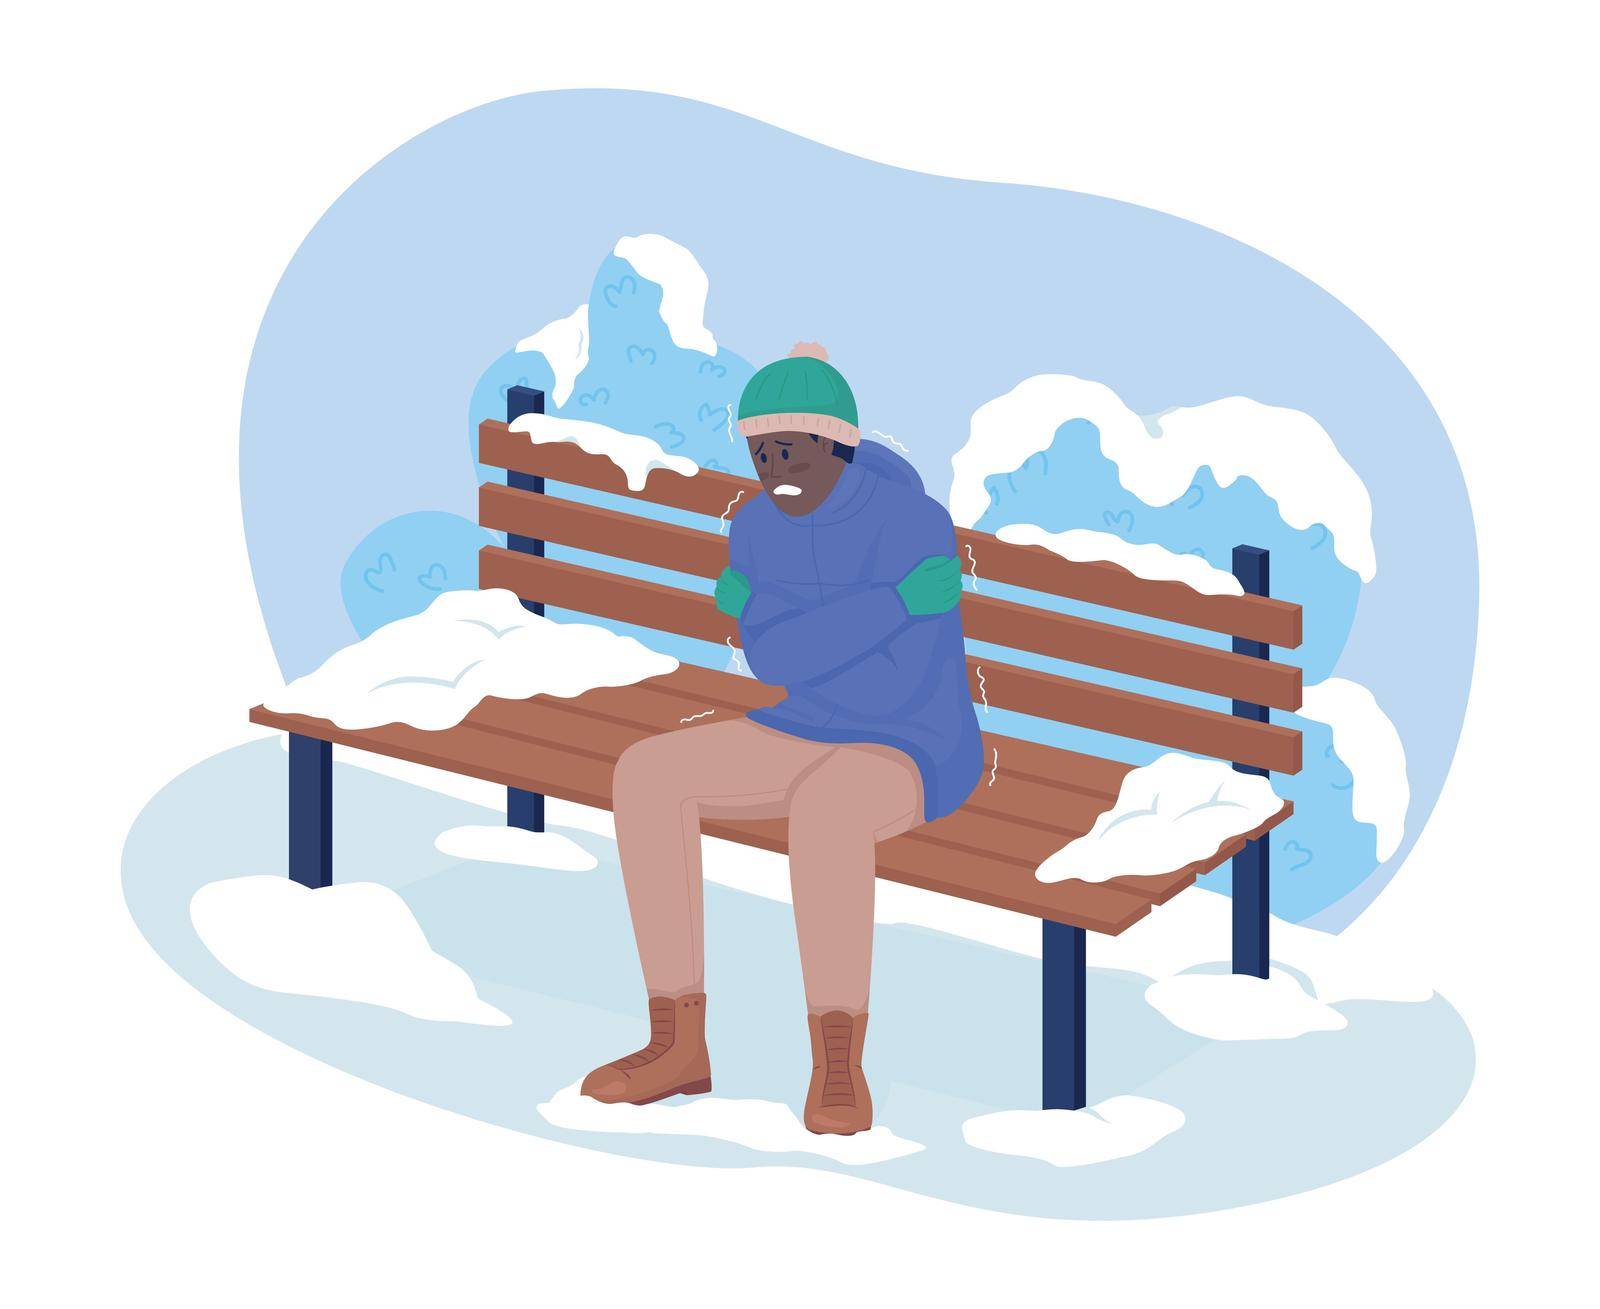 Freezing from cold in park 2D vector isolated illustration. Man shaking sitting on bench in park flat characters on cartoon background. Everyday situation and daily life colourful scene